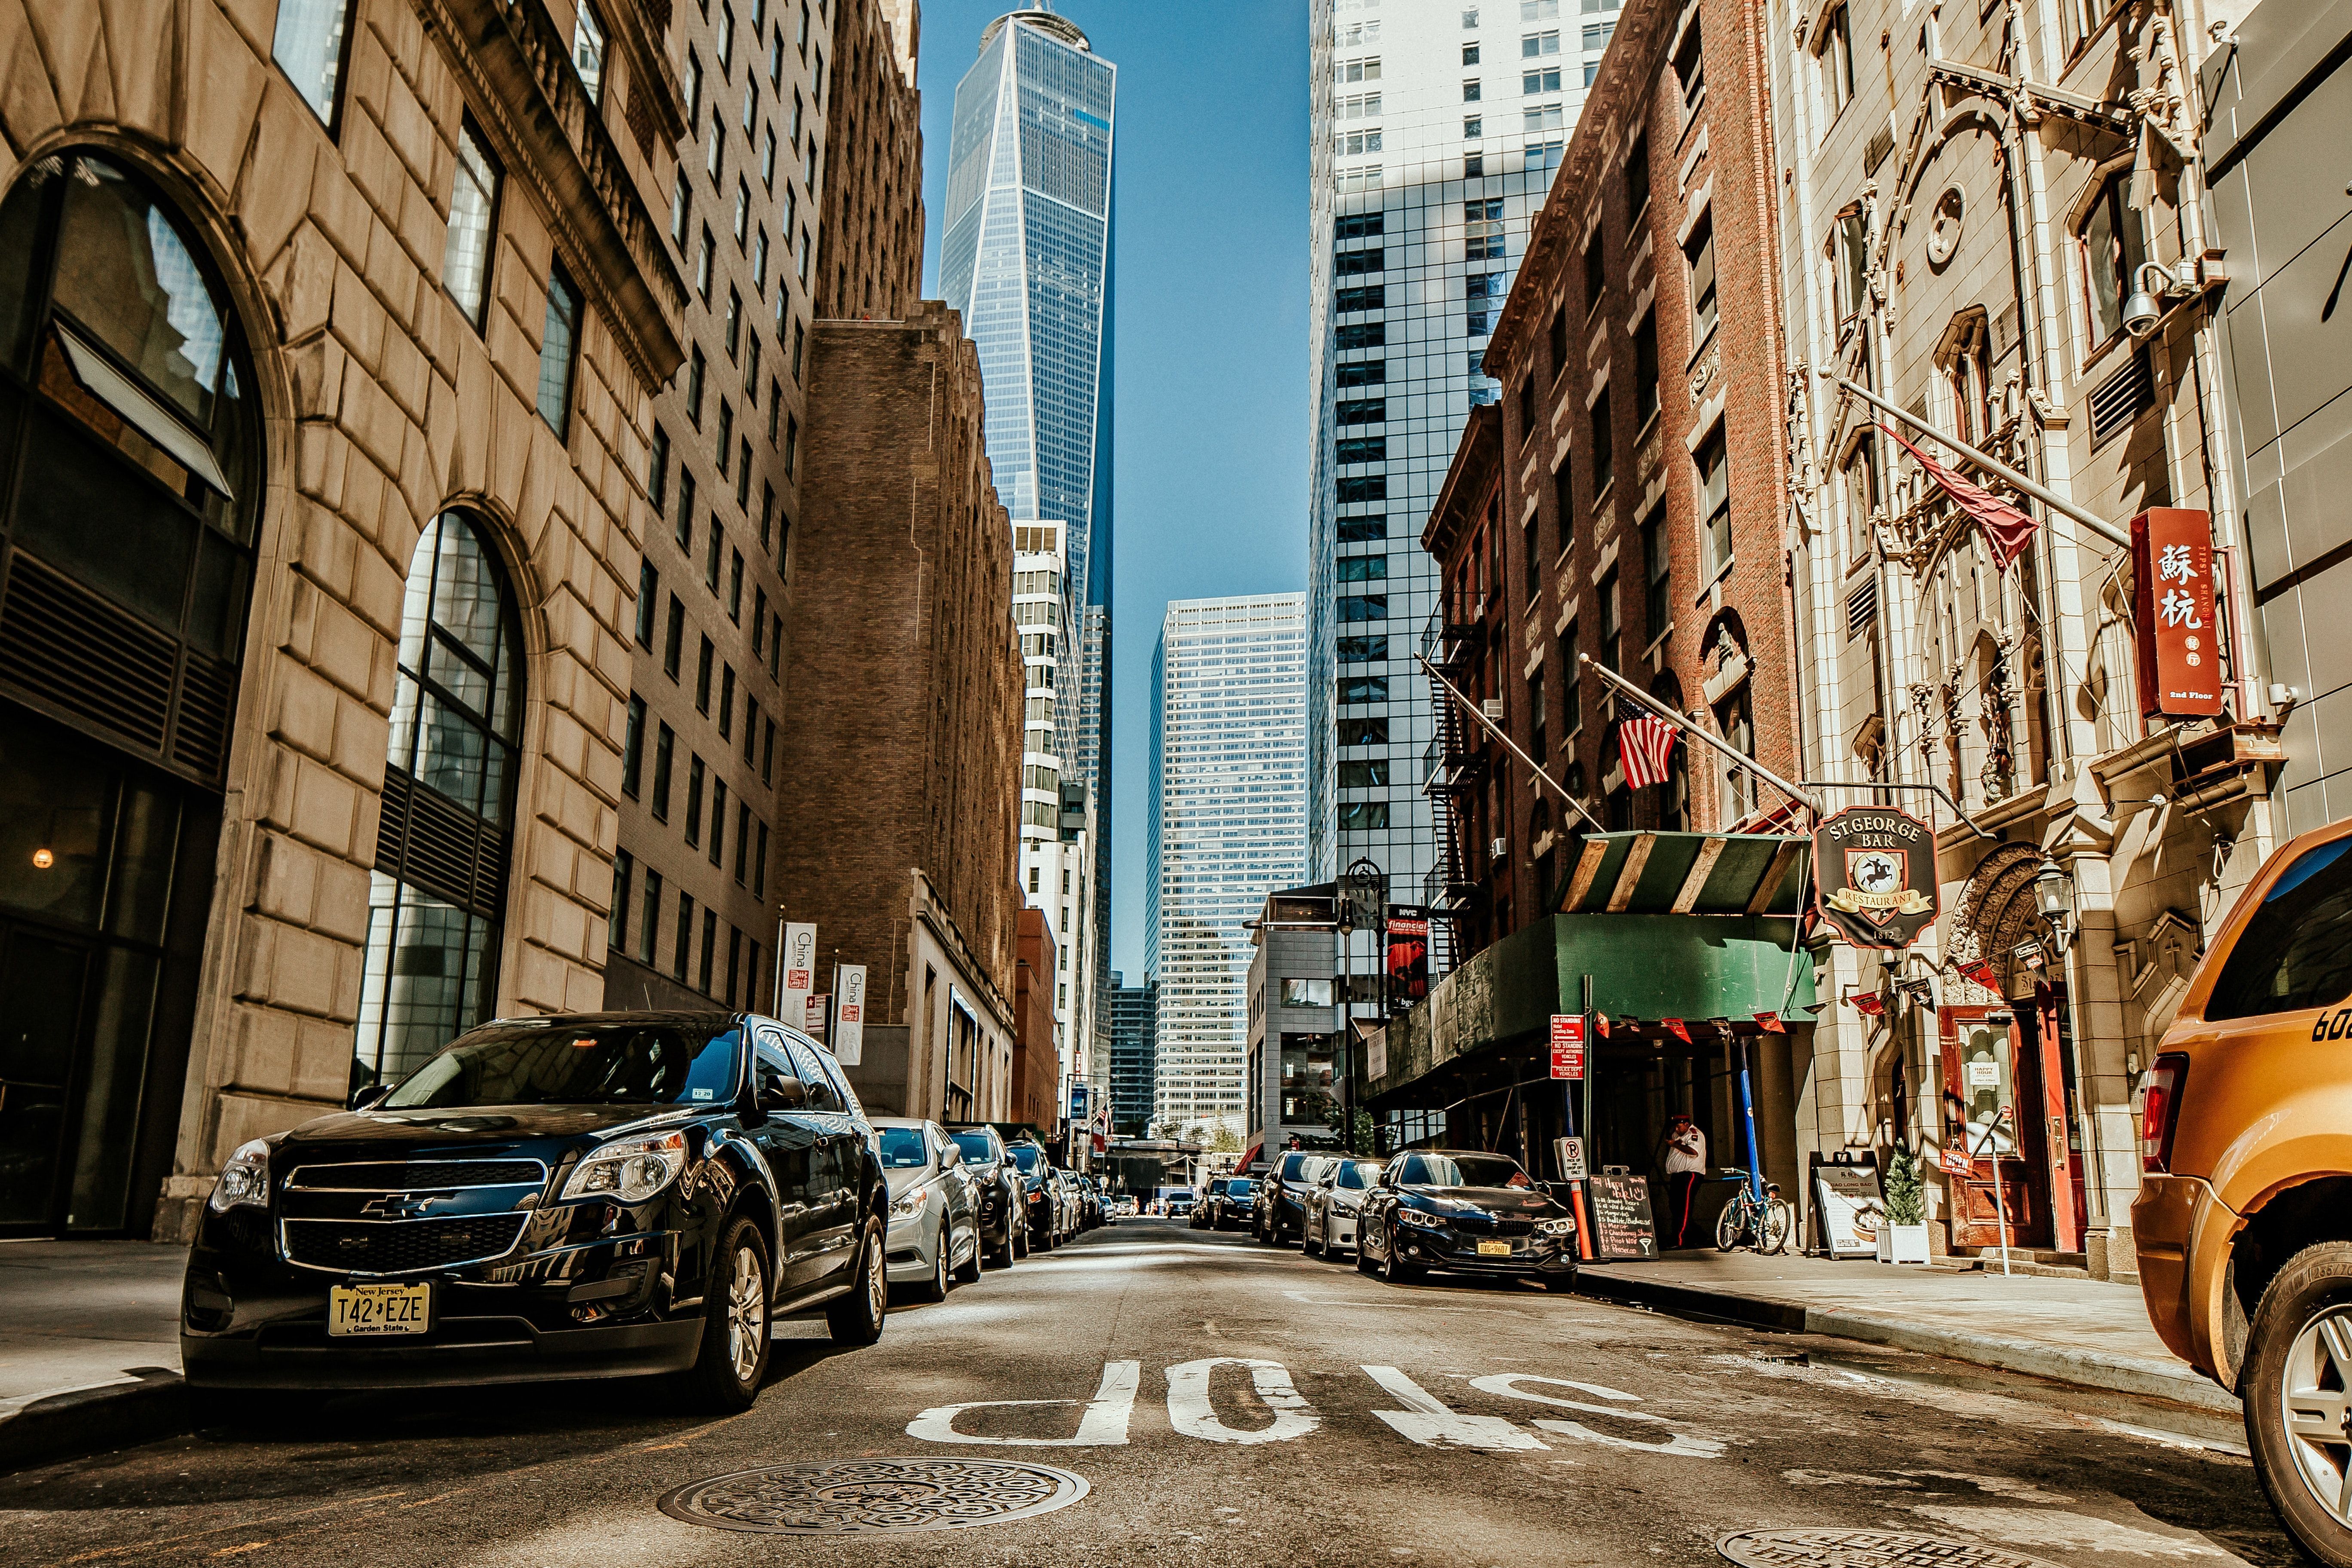 A street in New York City with cars parked on the side and a skyscraper in the background. - New York